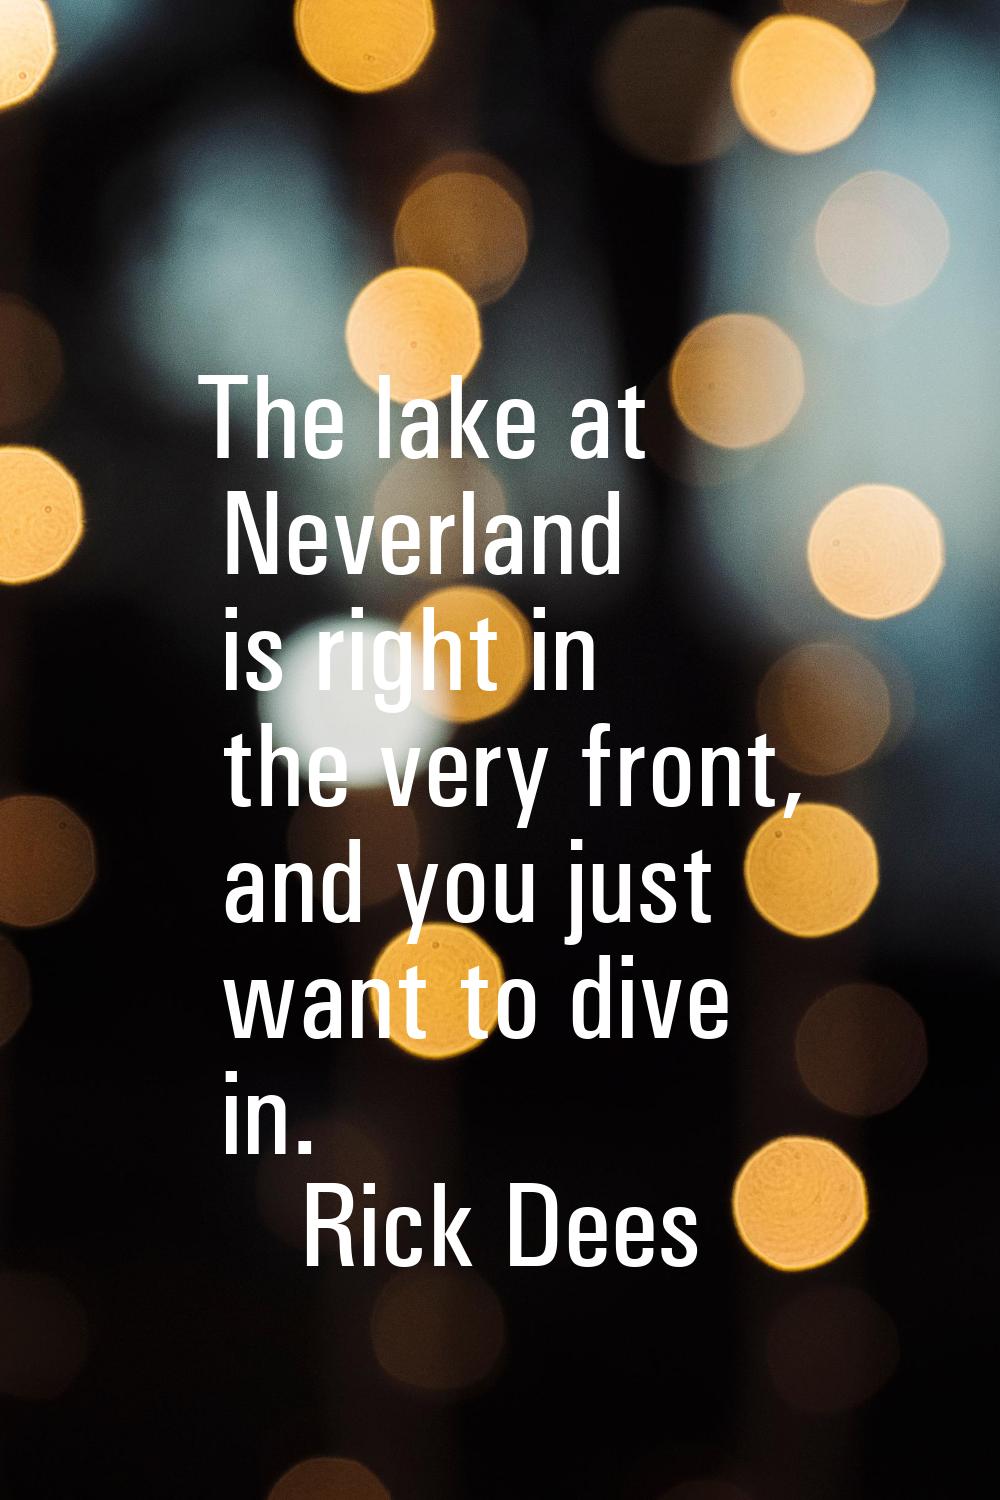 The lake at Neverland is right in the very front, and you just want to dive in.